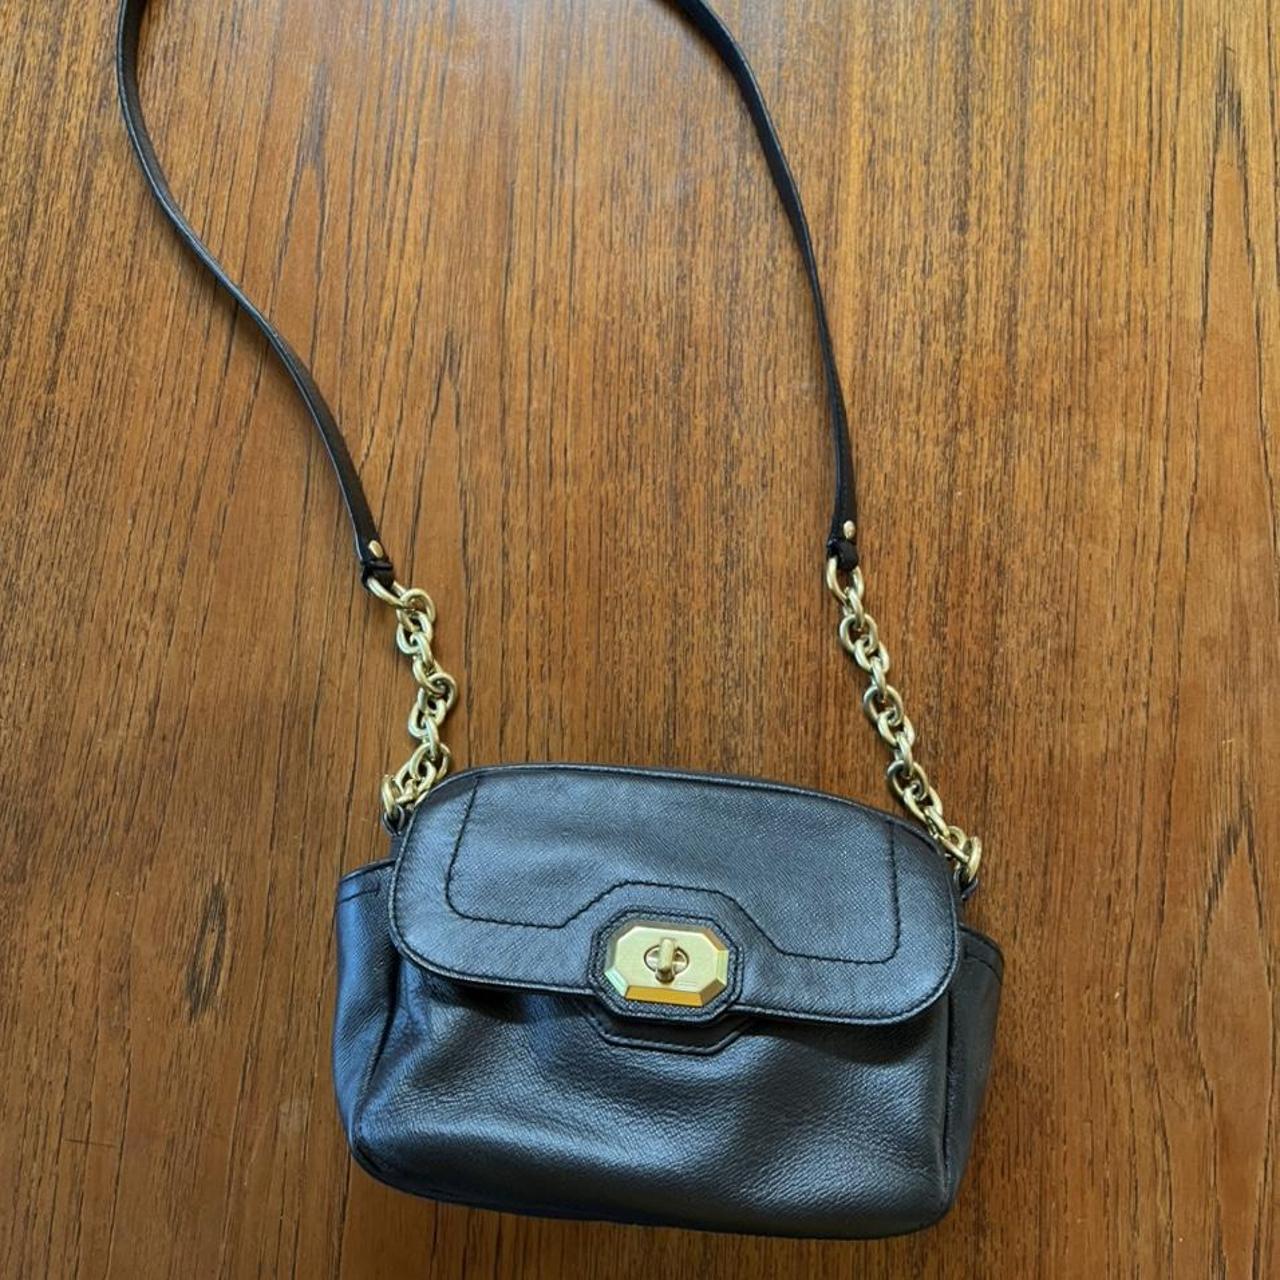 Coach Campbell Crossbody Turnlock purse is the... - Depop